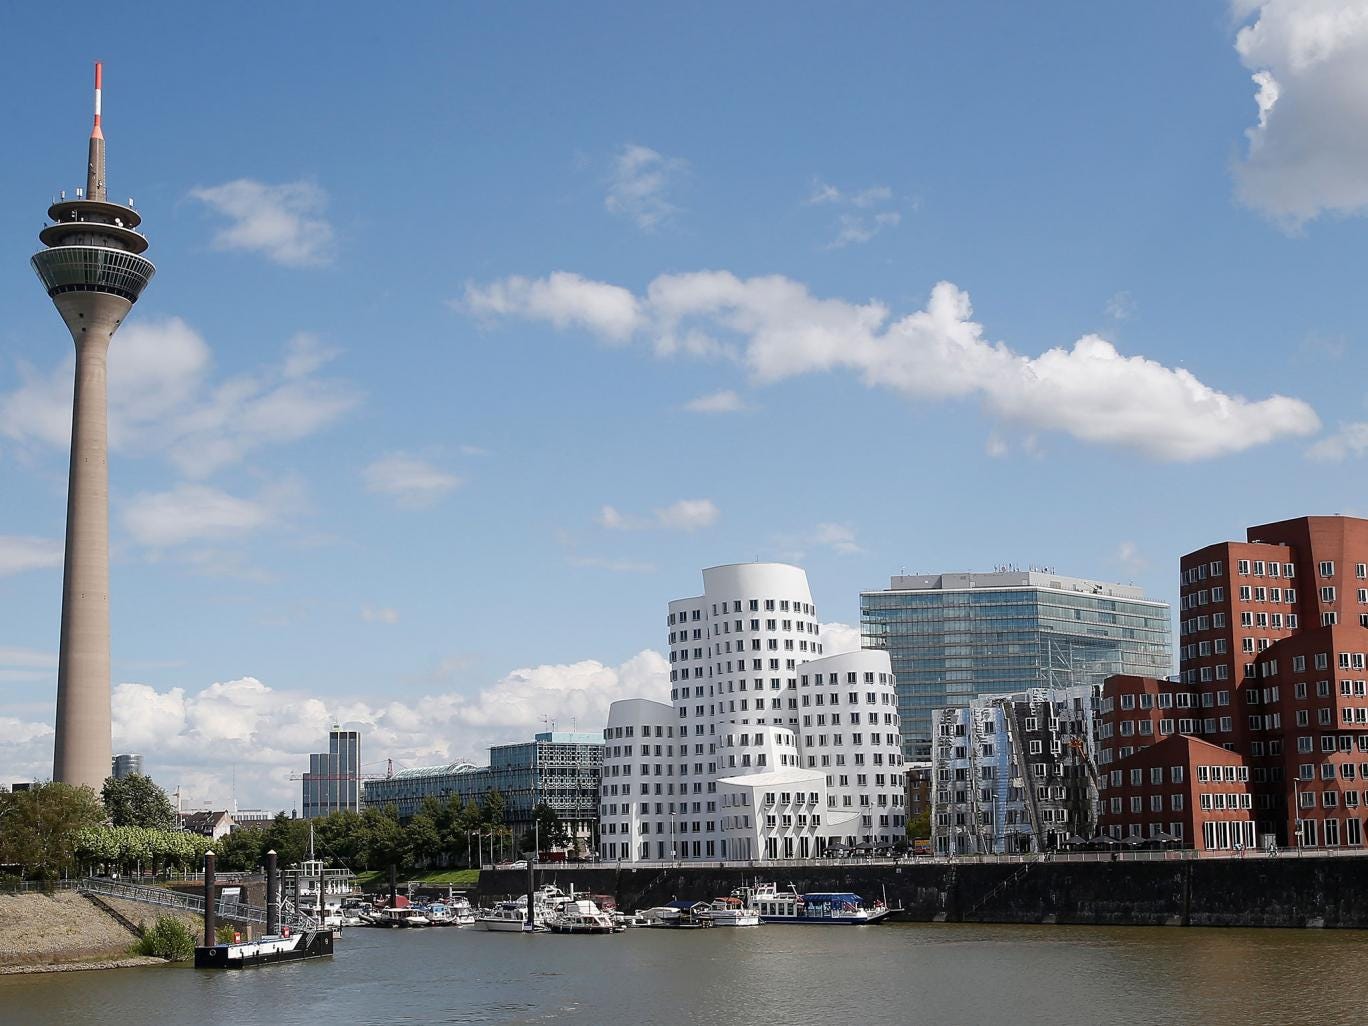 An overview of buildings are pictured at Duesseldorf media harbor on August 12, 2014 in Duesseldorf, Germany